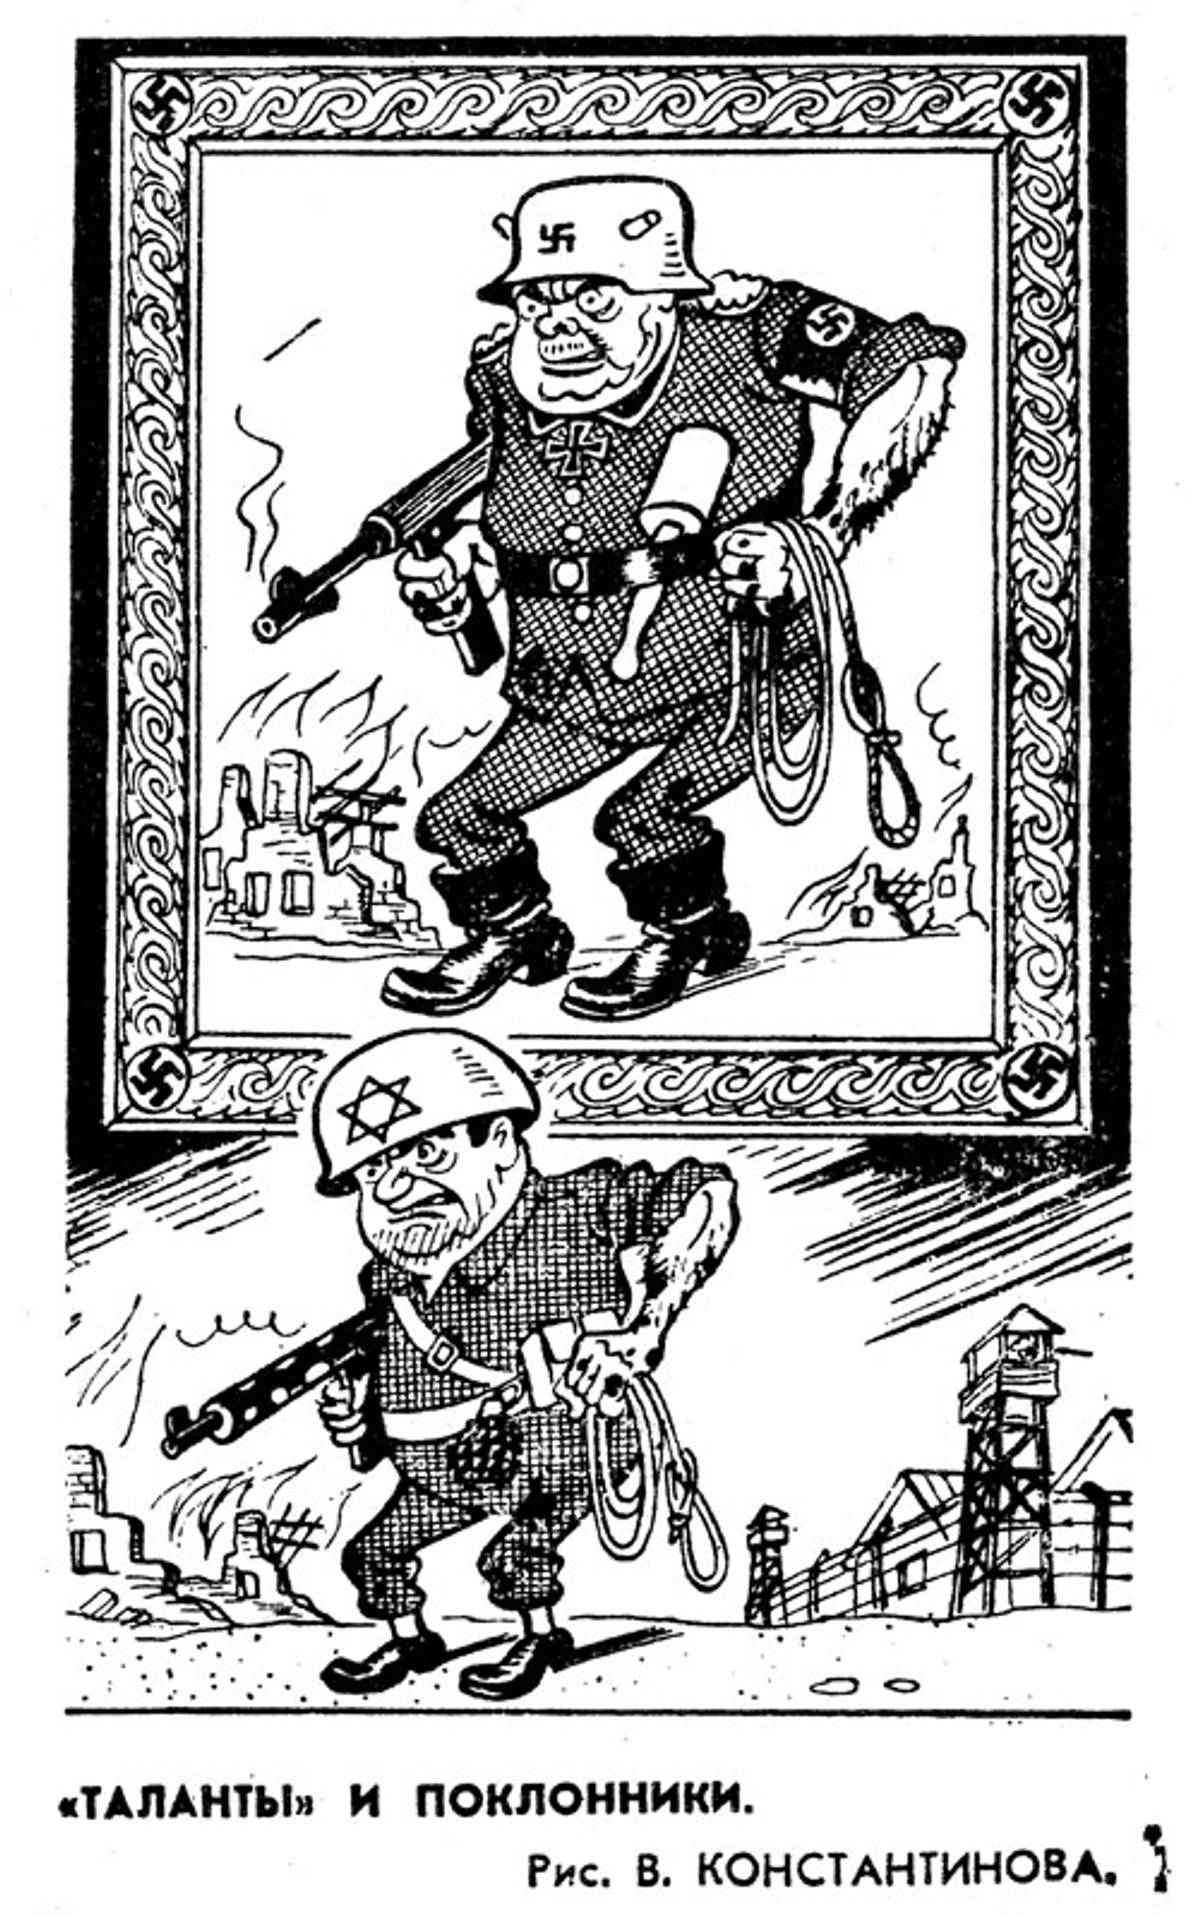 Fig. 15: ‘Talent and its admirers,’ V. Konstantinov, Vecherniaya Moskva, March 11, 1970. (From The Israeli-Arab Conflict in Soviet Caricatures, 1967–1973 by Yeshayahu Nir, Tcherikover Publishers, 1976)